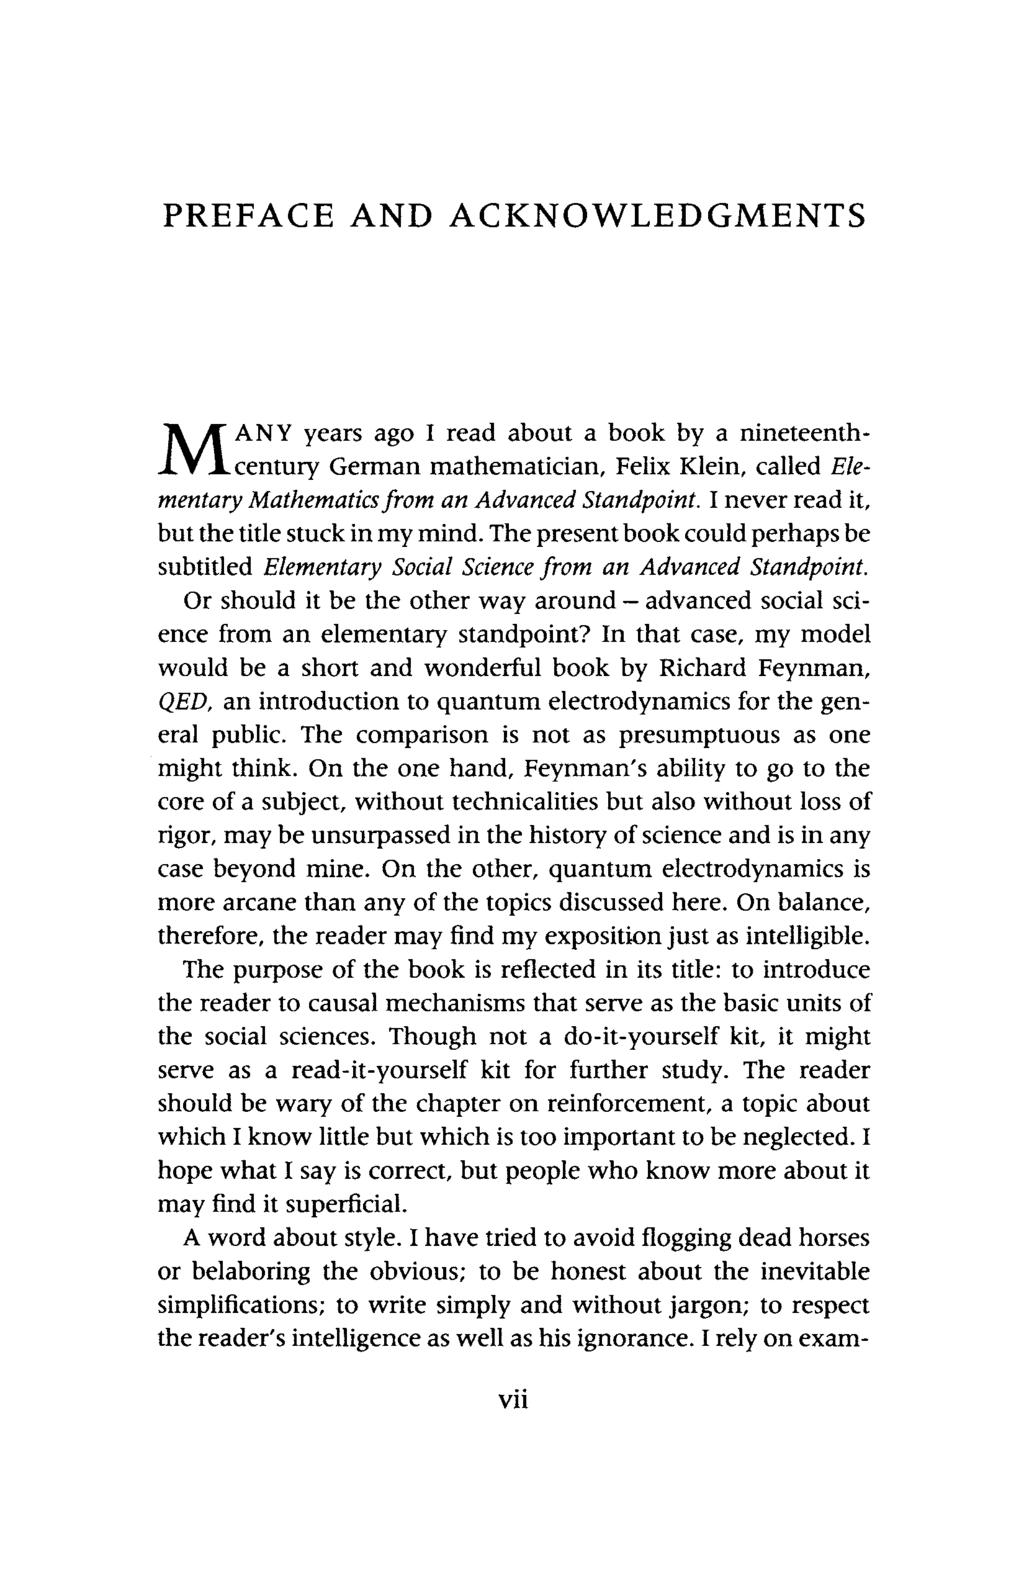 PREFACE AND ACKNOWLEDGMENTS MANY years ago I read about a book by a nineteenthcentury German mathematician, Felix Klein, called Elementary Mathematics from an Advanced Standpoint.